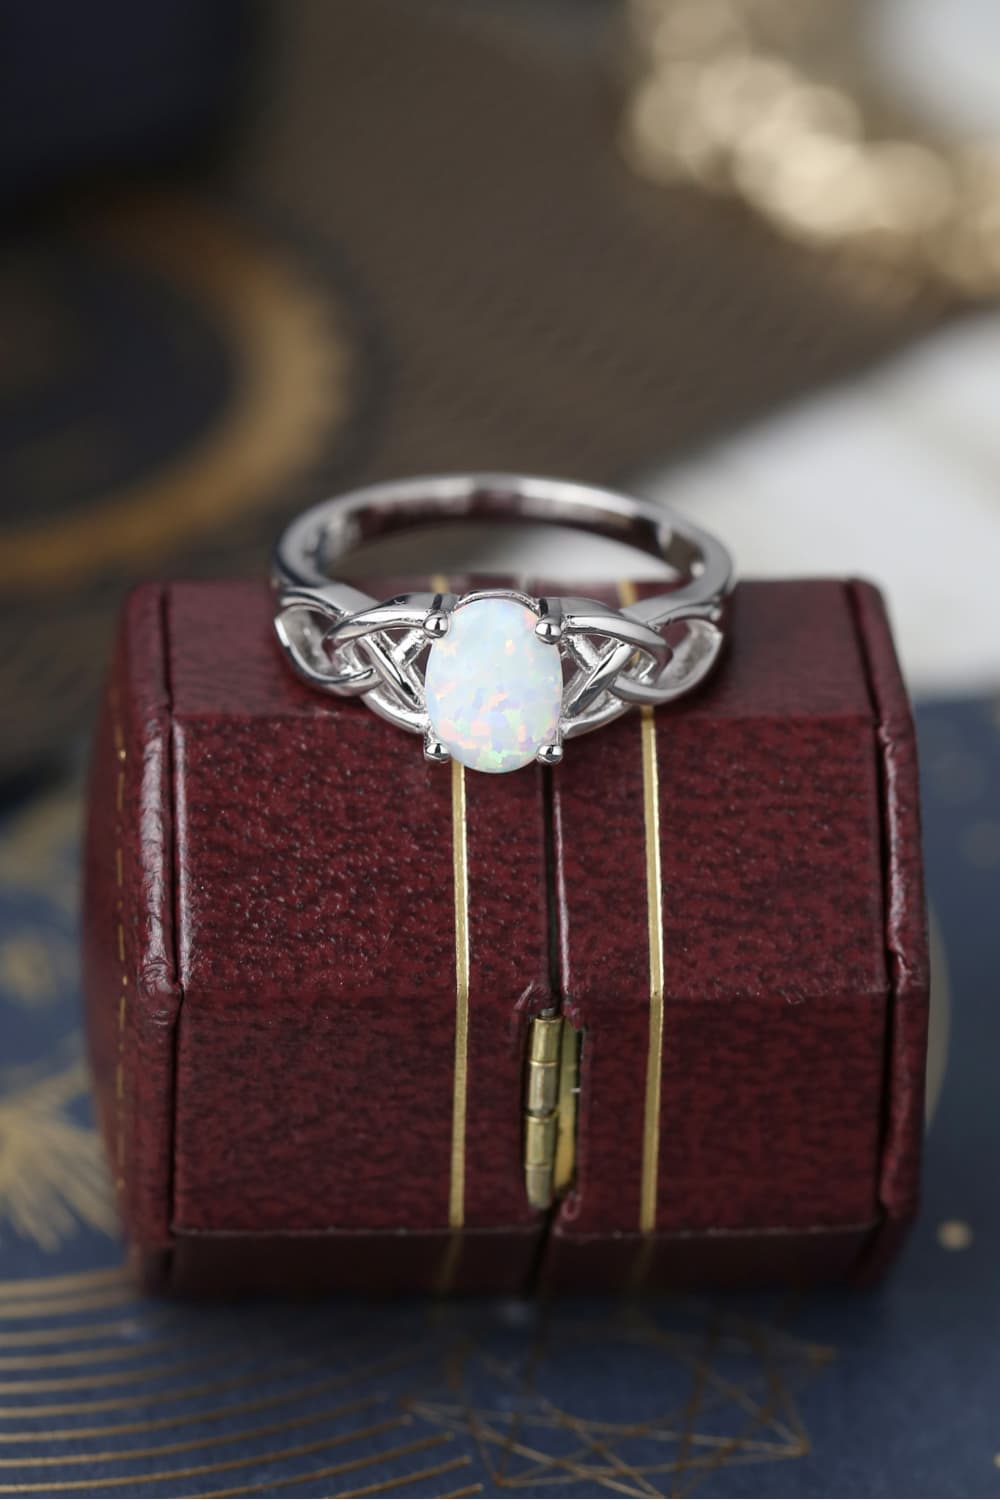 Opulent Love - Mesmerizing Opal Ring for the Modern Woman - Add a Touch of Enchantment to Your Every Moment. - Guy Christopher